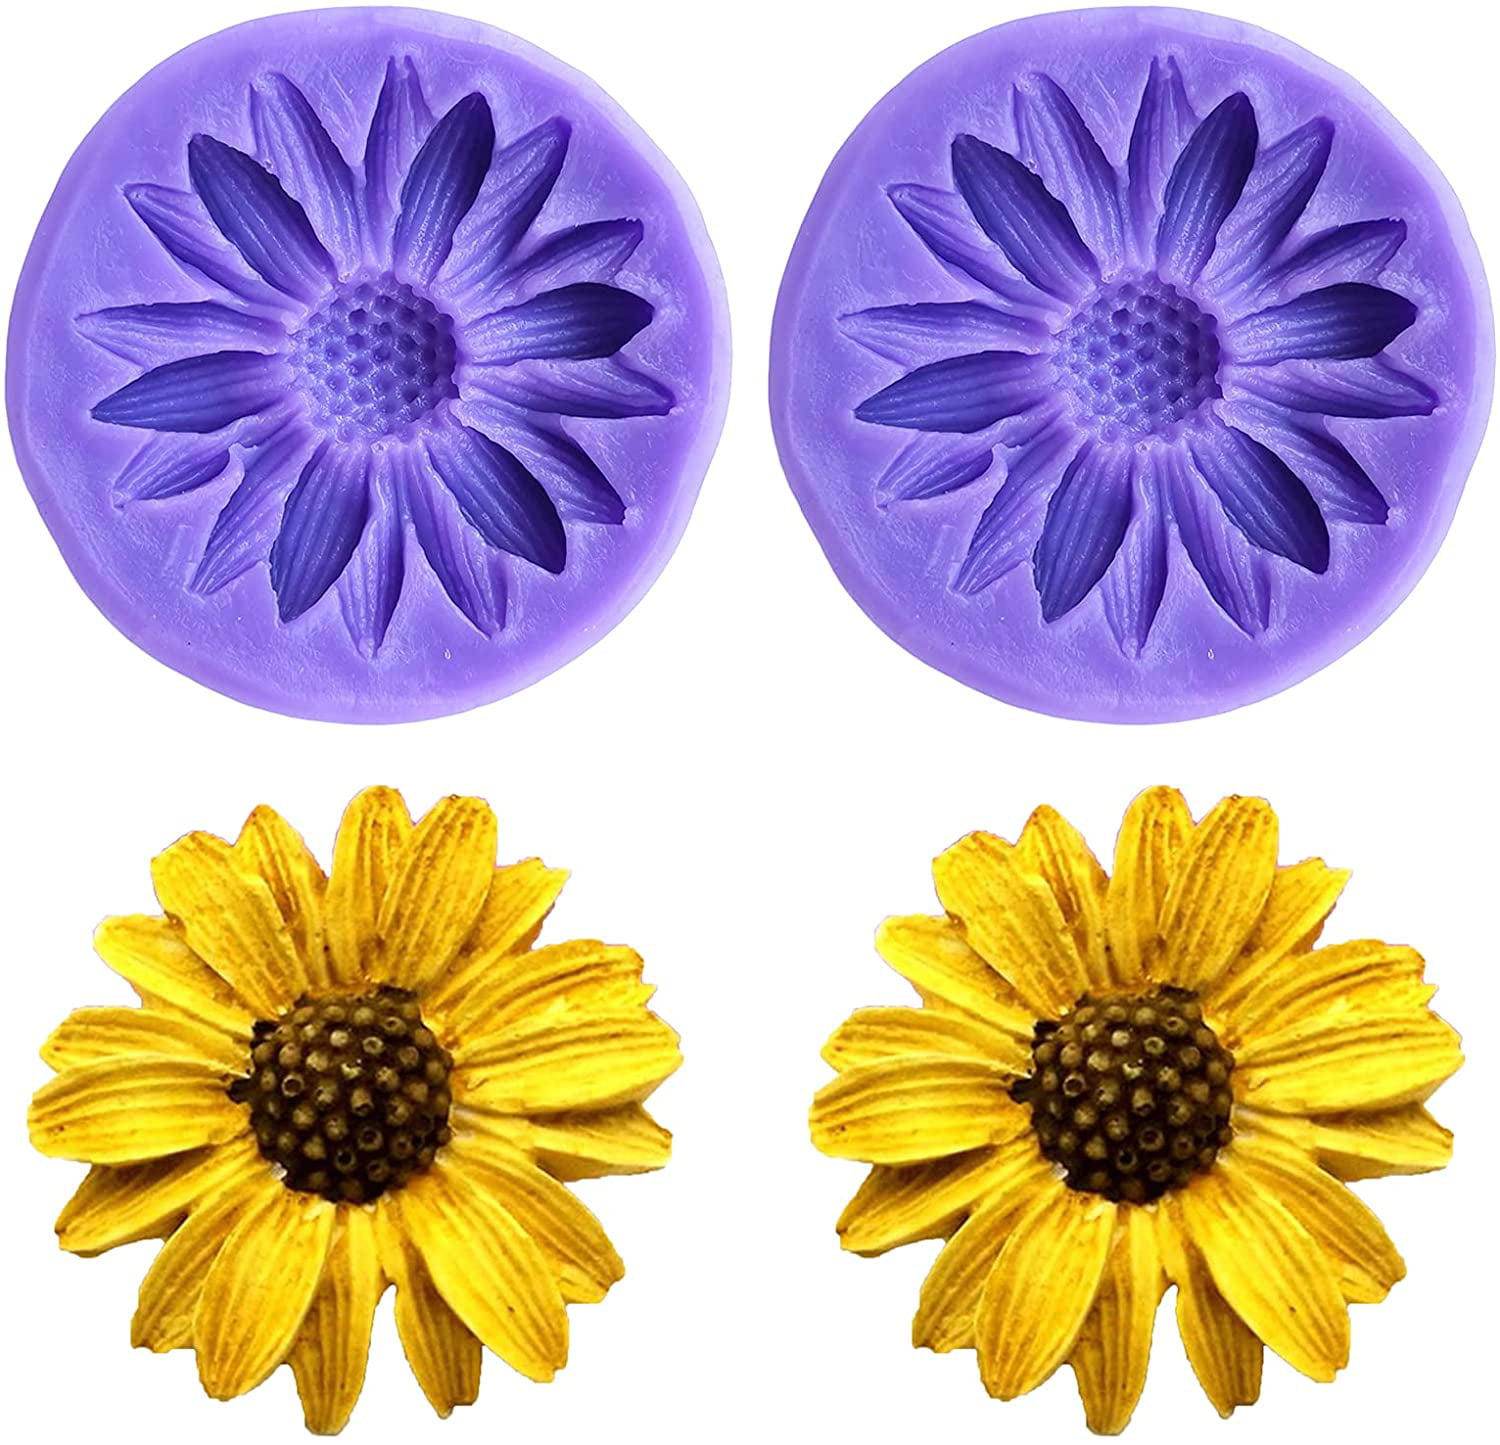 Sunflower Floral Soap Mold Cake Mold Silicone Mould For Candy ChocolateWFIT 